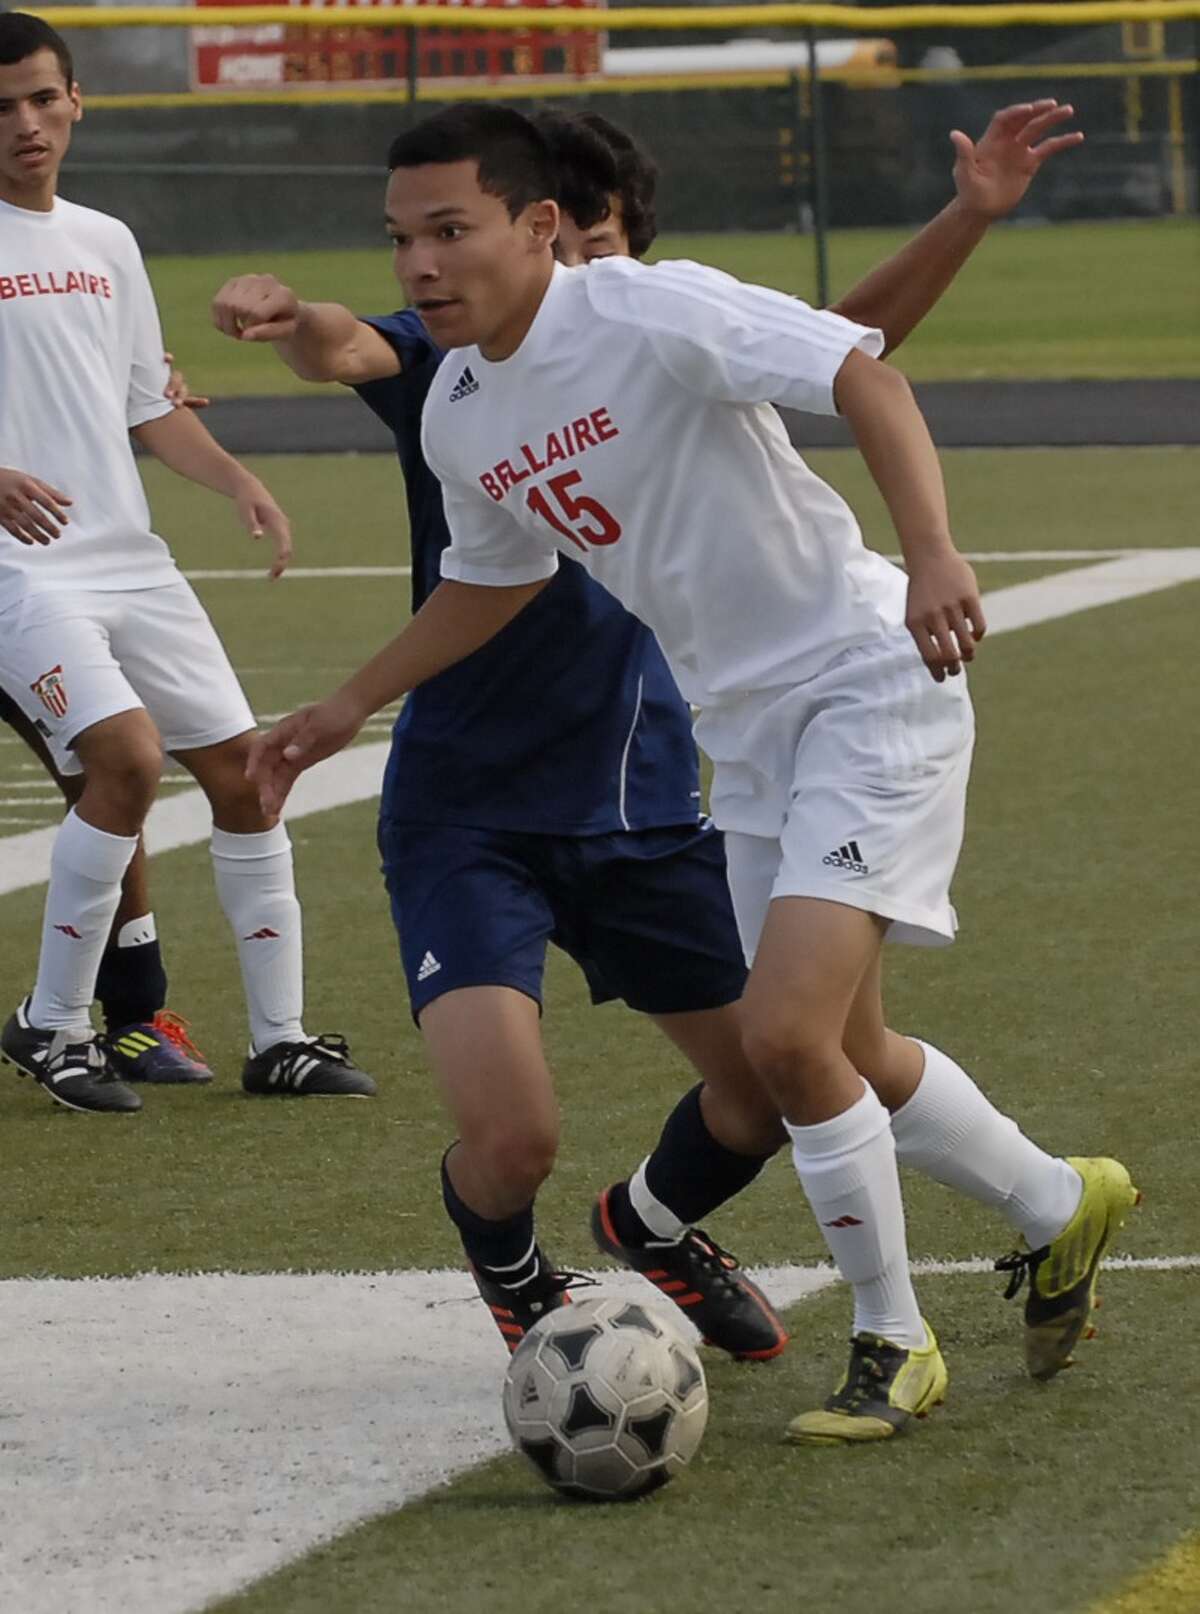 Samuel Calderon (#15) with Bellaire controls the ball during their game with Lamar at Butler Stadium Friday 2/22/13. Photo by Tony Bullard.